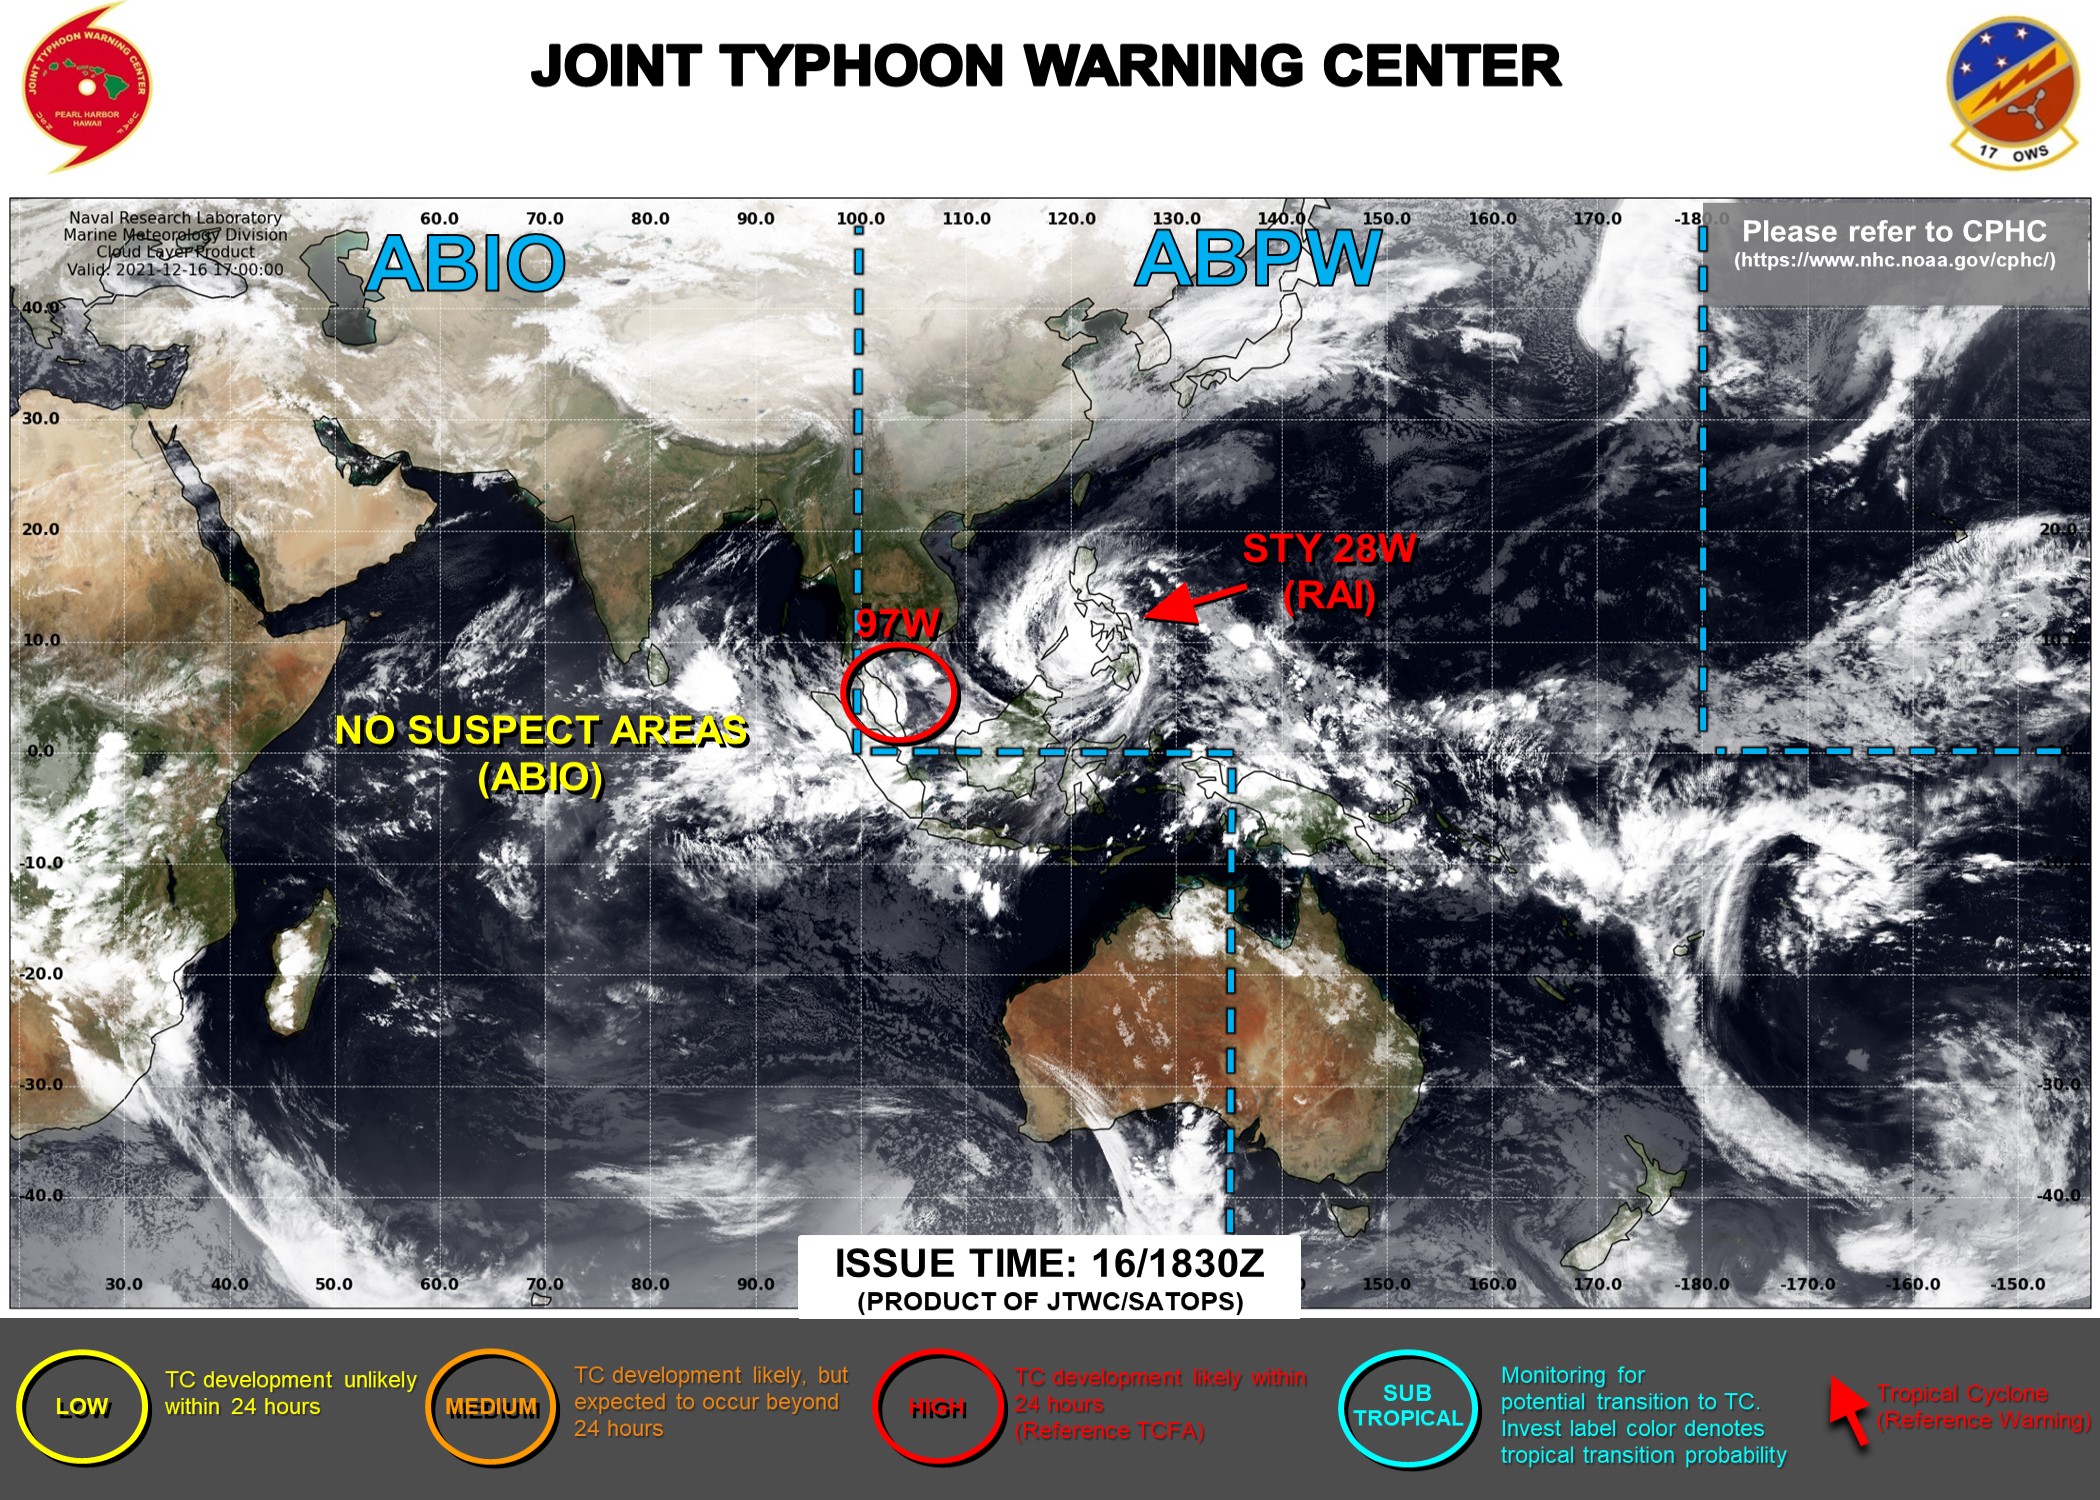 JTWC IS ISSUING 6HOURLY WARNINGS ON 28W(RAI). 3HOURLY SATELLITE BULLETINS ARE ISSUED ON 28W AND INVEST 97W.